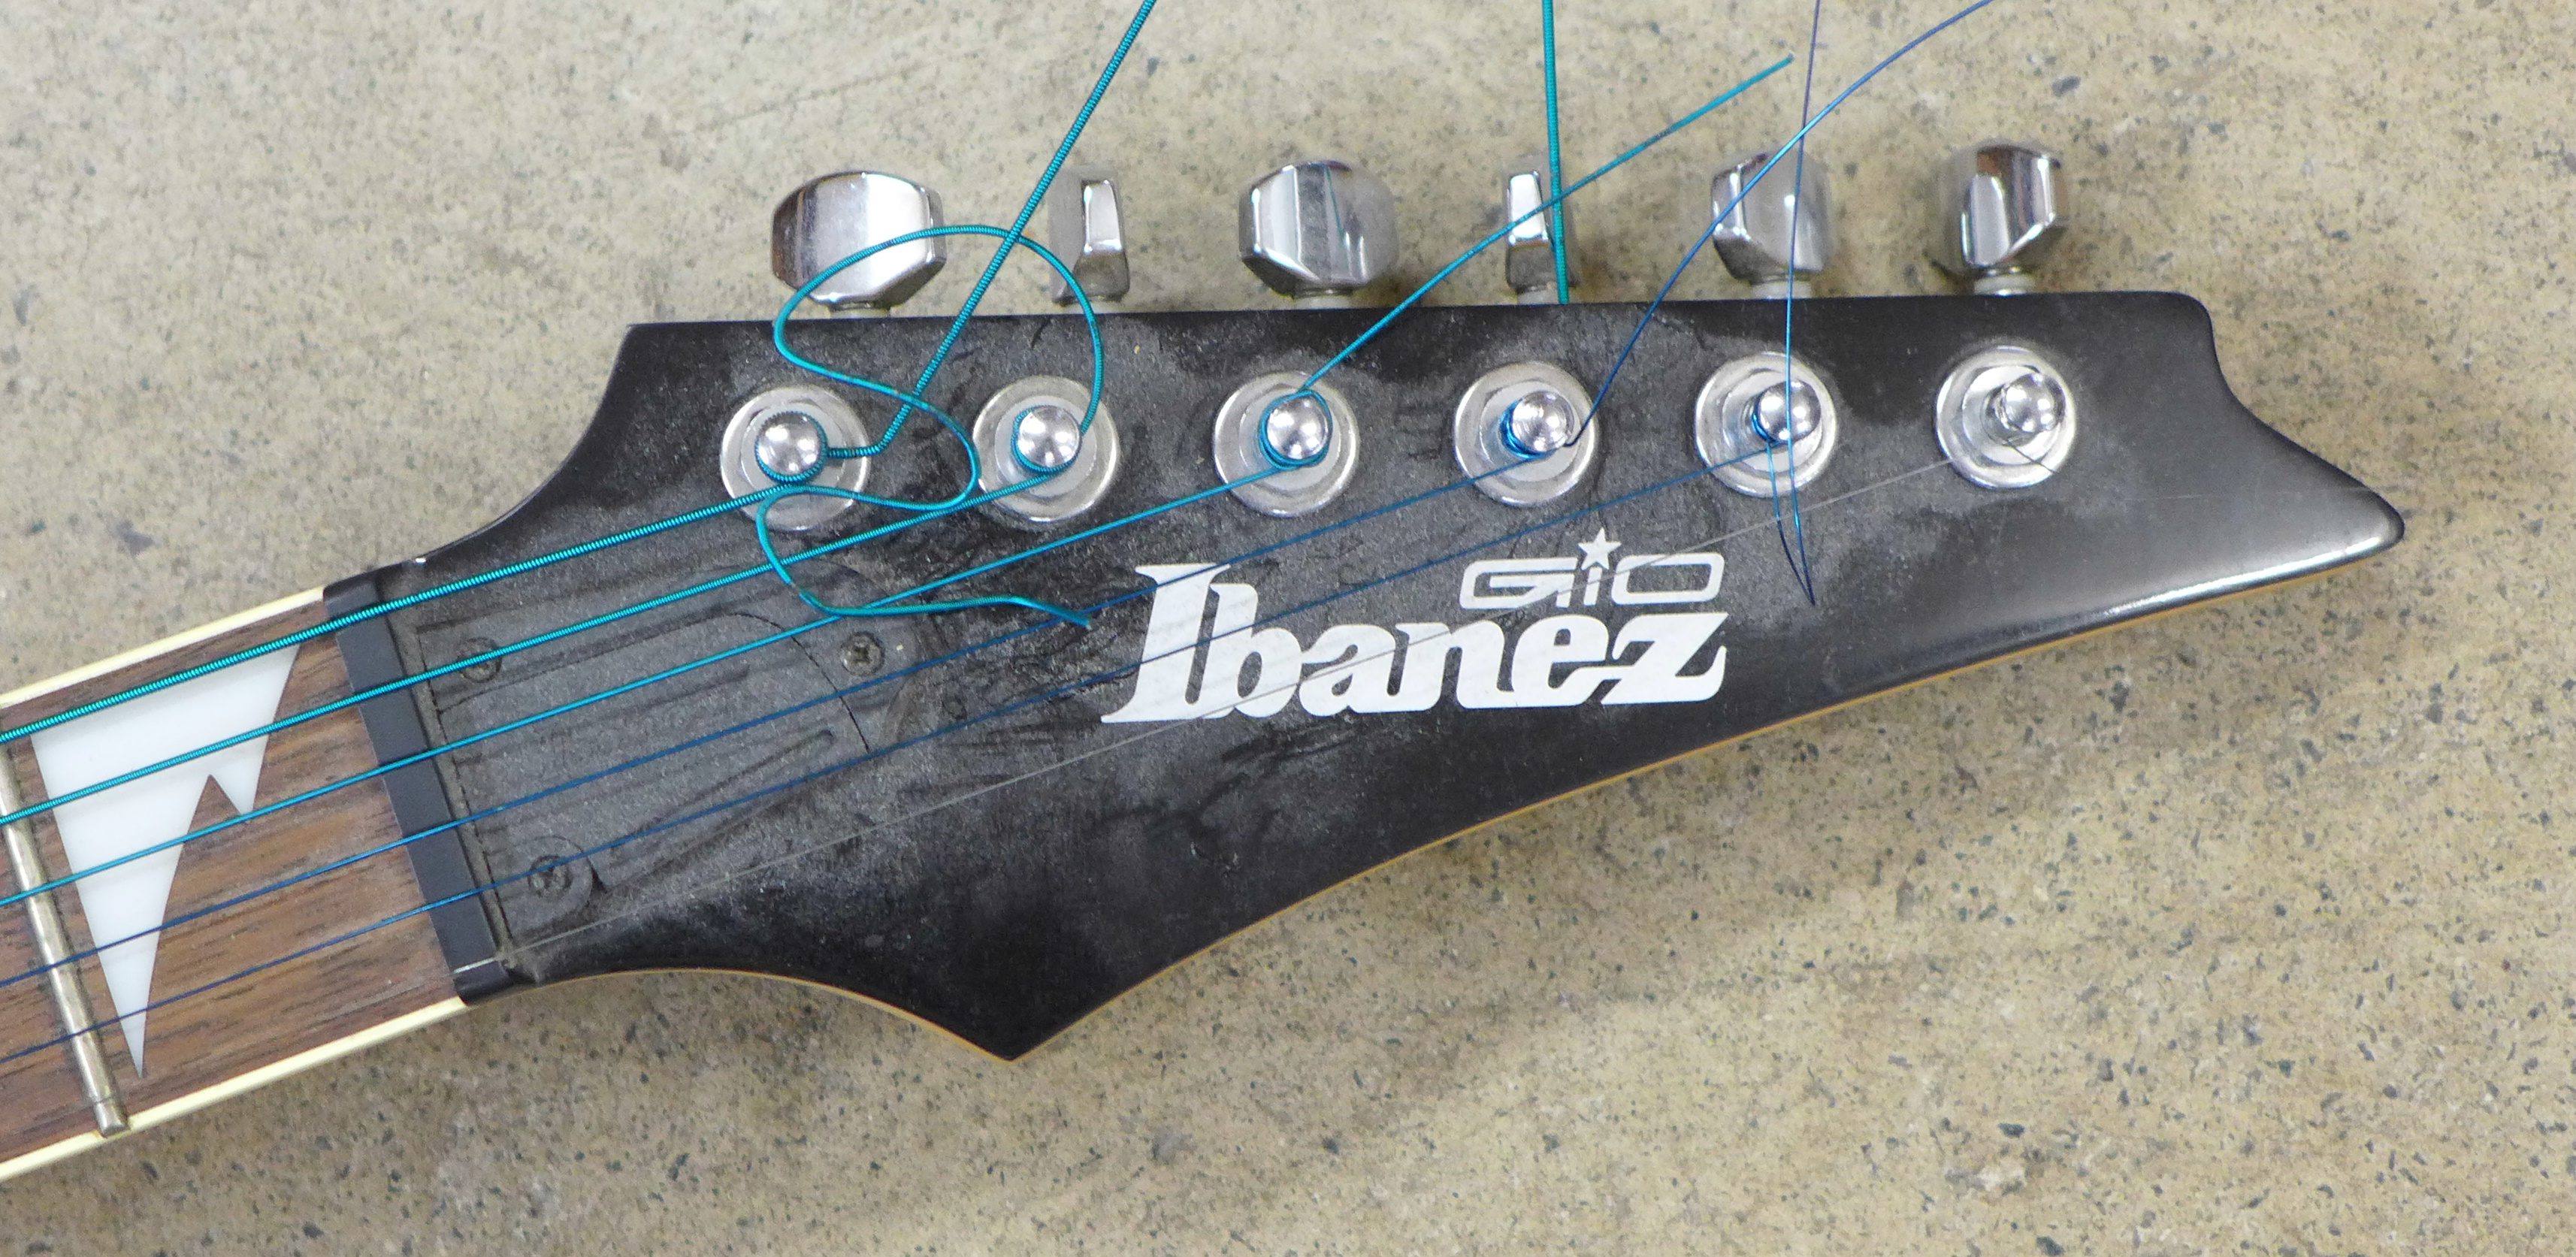 A Gio Ibanez electric guiter - Image 2 of 5